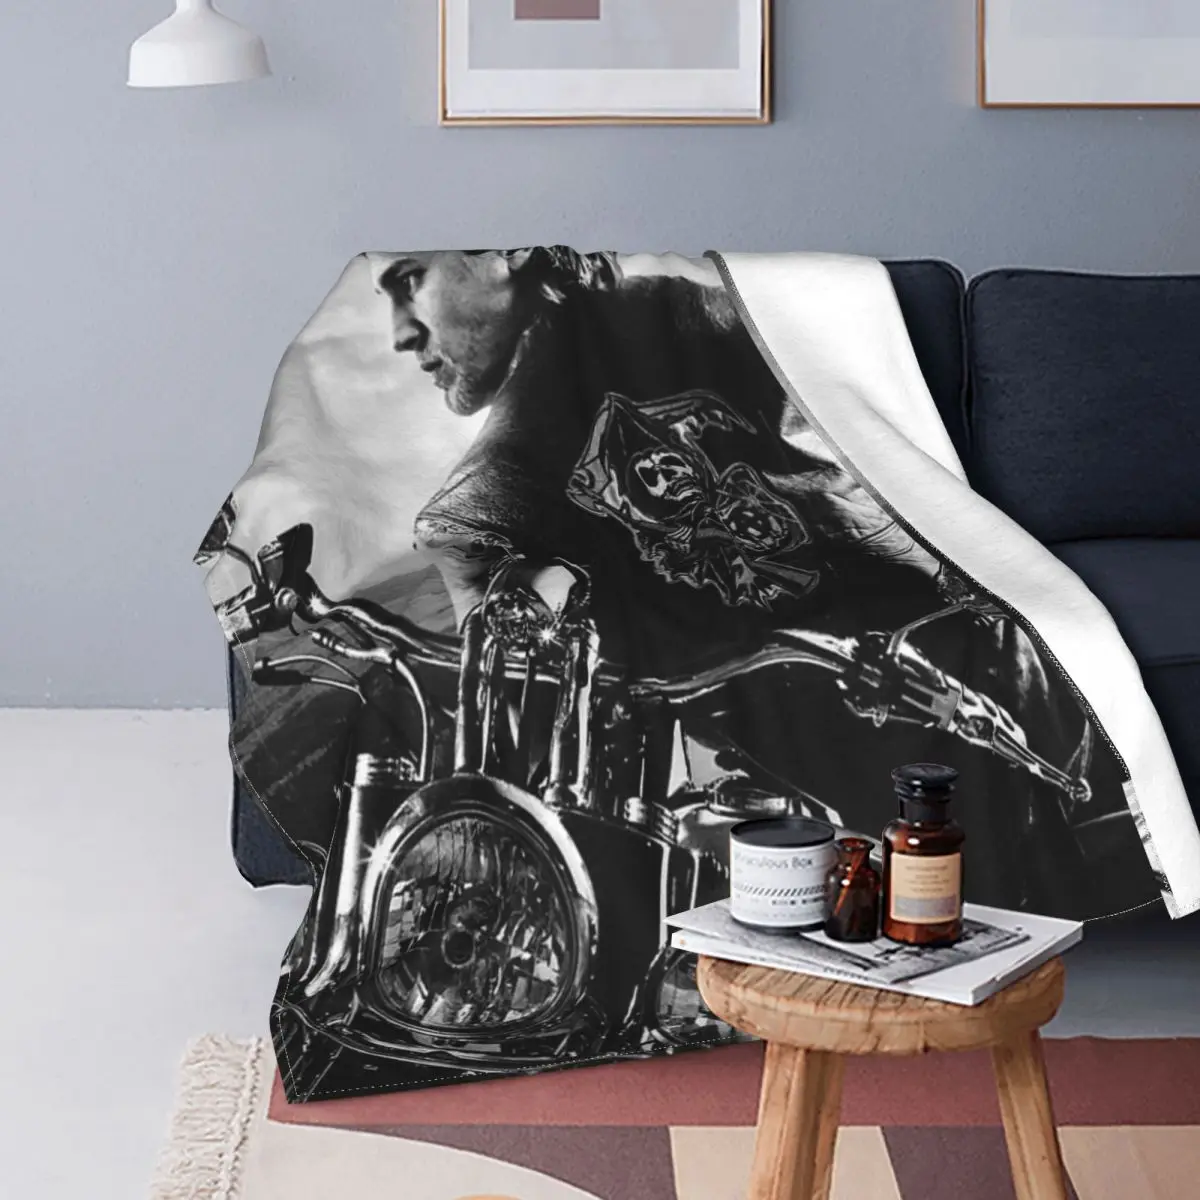 

Sons of Anarchy Jax Teller Crime Pattern Blanket Flannel Death Motorcycle Rock Soft Blanket for Airplane Travel Bed